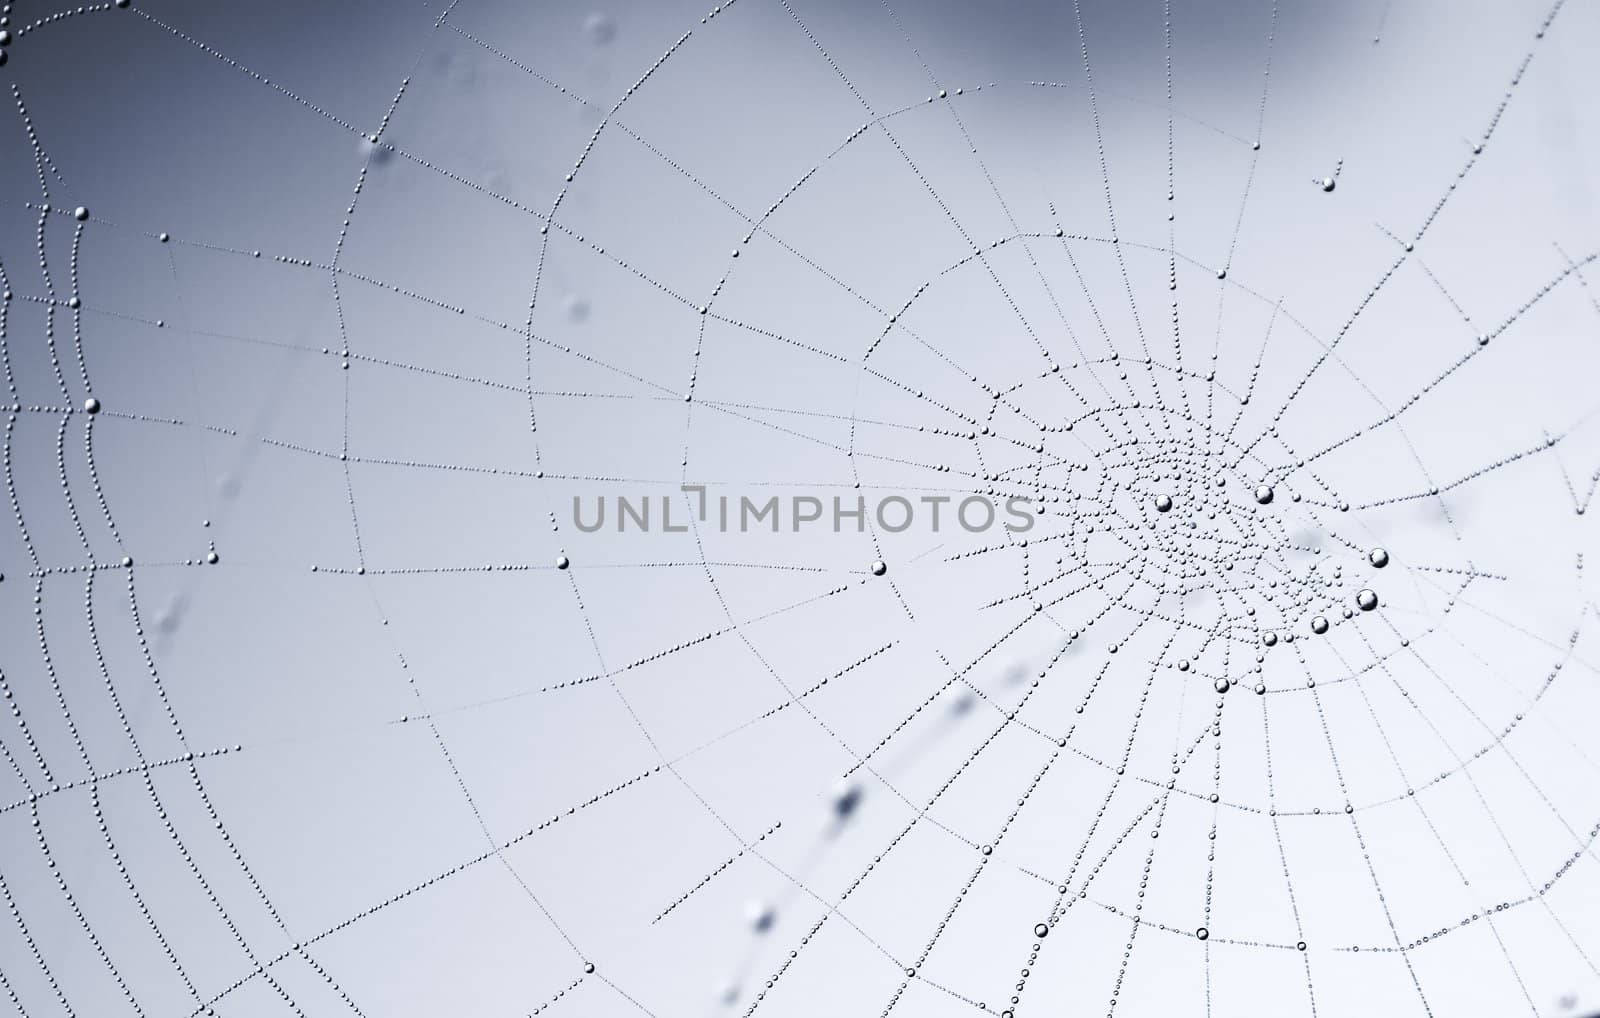 Spherical shiny dew drops (resembling planets) on the spider web; photographed against a misty overcast sky (i.e. light gray background); focused on the center of the web.